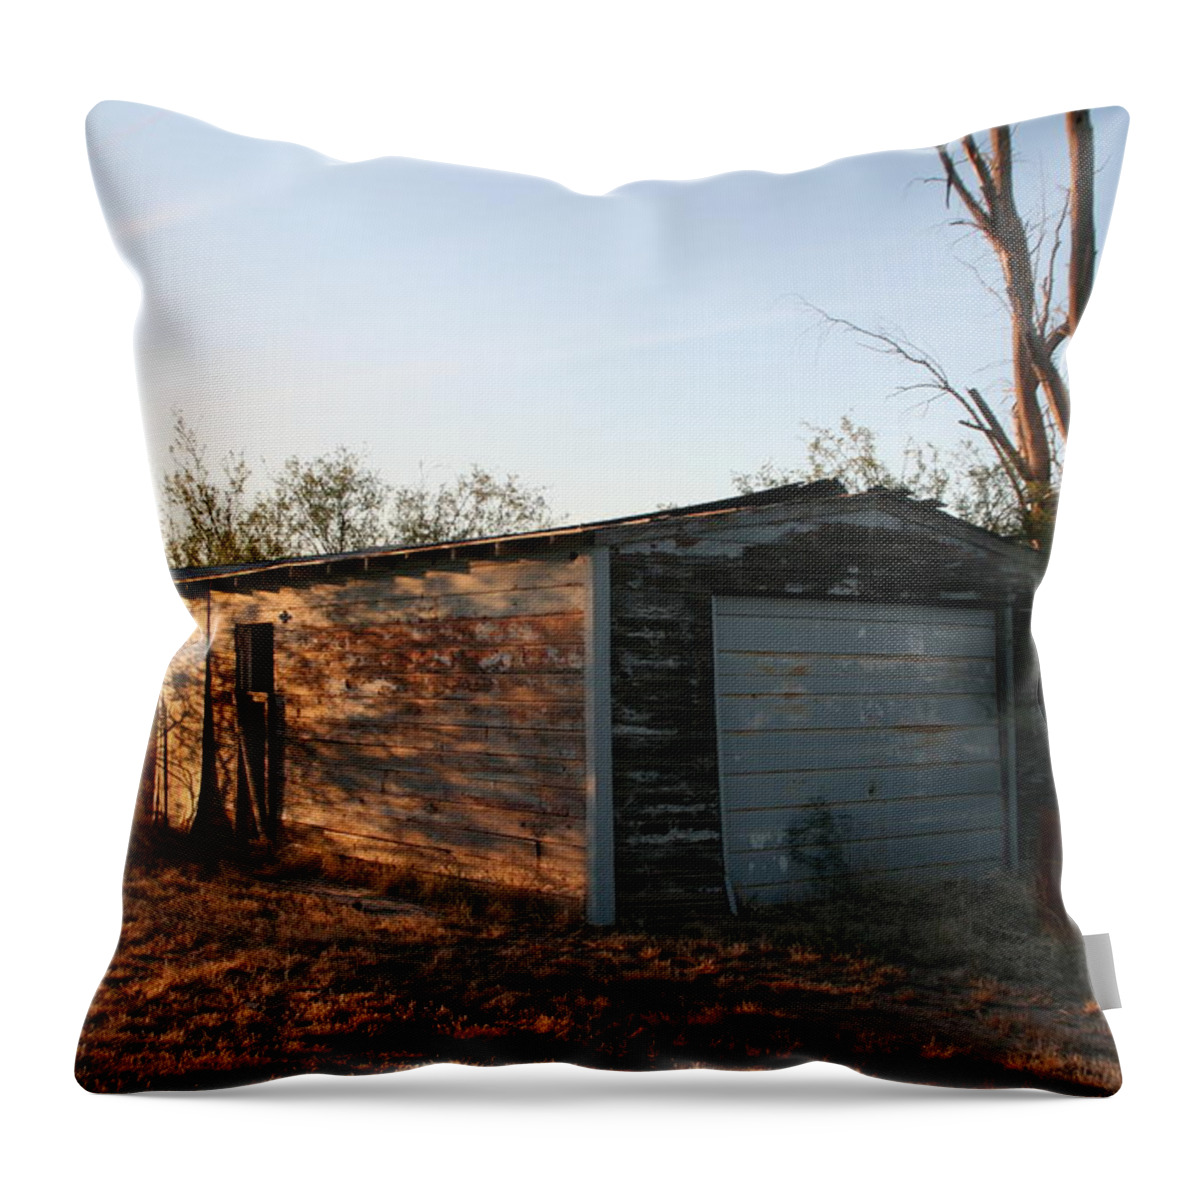 Tucson Throw Pillow featuring the photograph Old Barn #1 by David S Reynolds